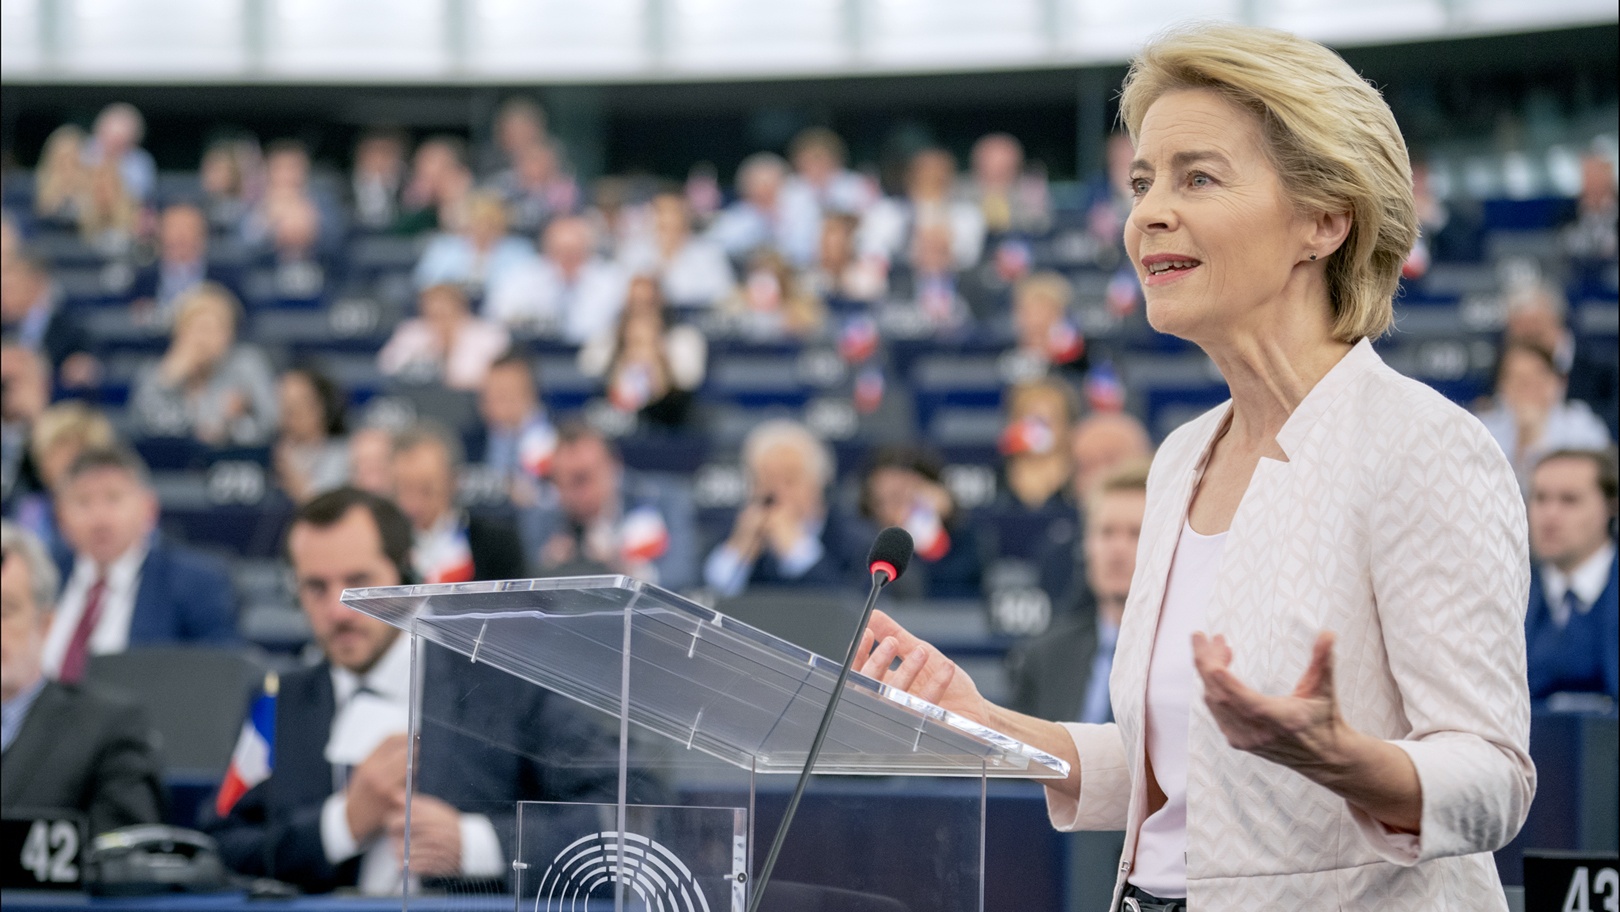 In a debate with MEPs Ursula von der Leyen outlined her vision as Commission President by European Parliament